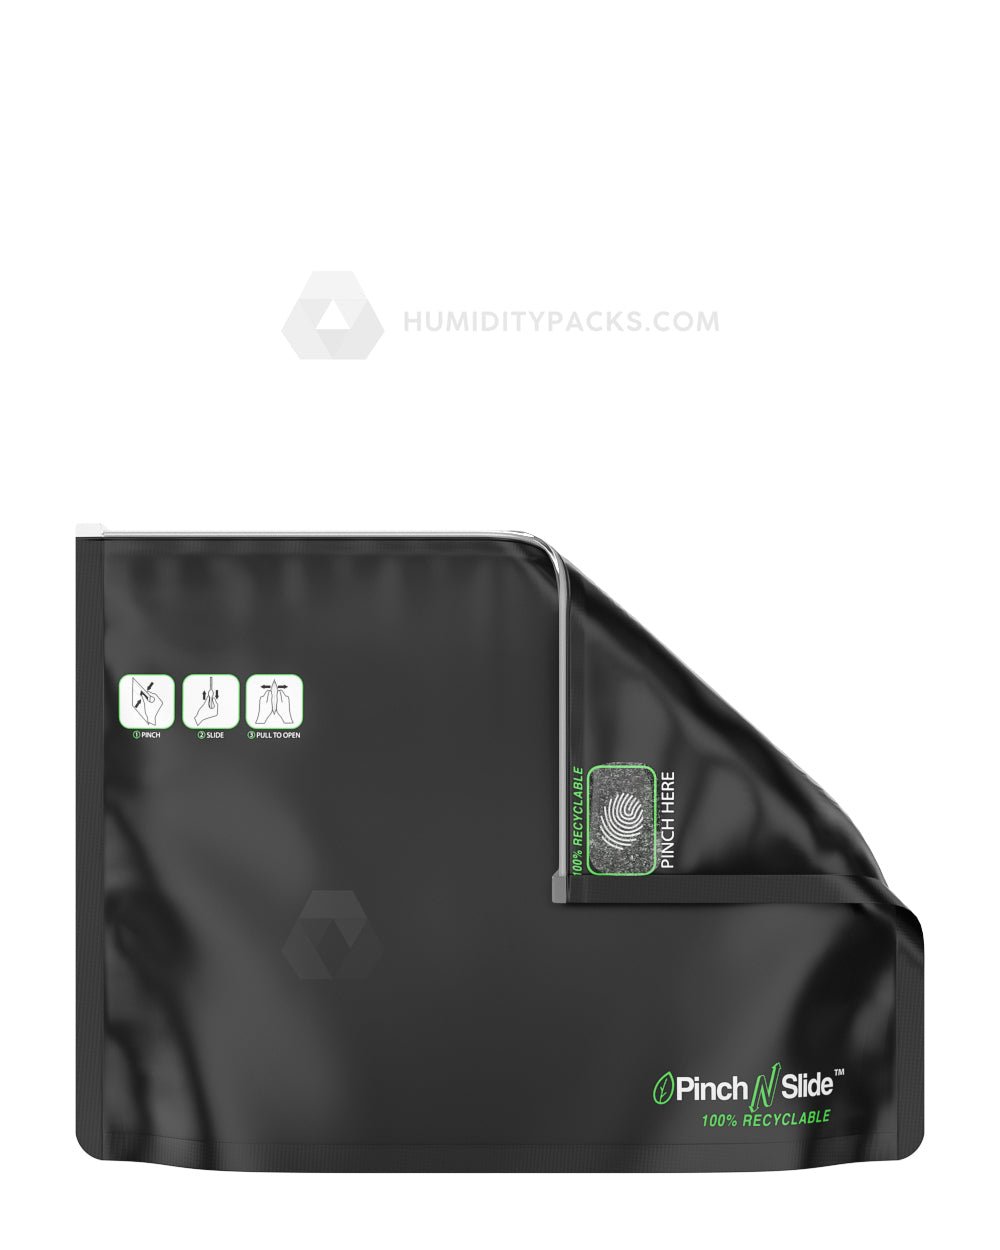 Matte-Black 12" x 9" Pinch N Slide Mylar Child Resistant & 100% Recyclable Exit Bags (56 gram) 250/Box Humidity Packs - 3